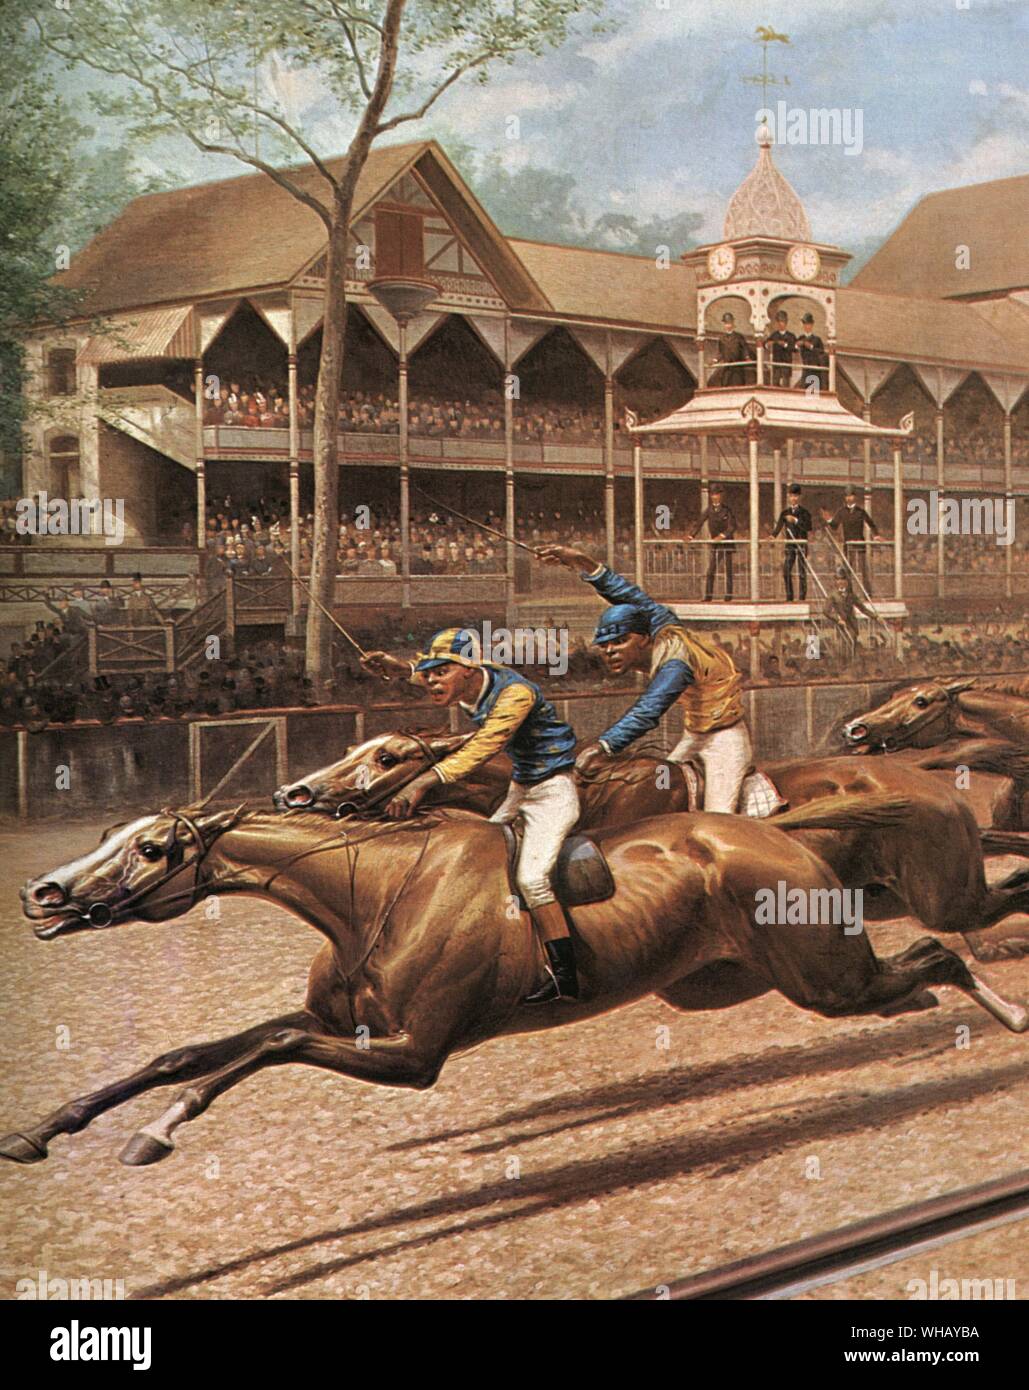 America lagged far behind Europe in two-year-old racing. the invention of the six-furlong Futurity at Sheepshead Bay, at $40,900, the richest race ever run until then in America. It was a deliberate attempt by the Coney Island Jockey Club in 1888 to establish two-year-old racing as a major part of the programme. (Louis Maurer's picture is dated 1889, which has confused some historians). The inaugural race had a field of 14. it was won by Proctor Knott, a gelding by Luke Blackburn out of Tallapoosa by Great Tom, ridden by S. Barnes. Haggin's Salvator was second, beaten half a length after a Stock Photo